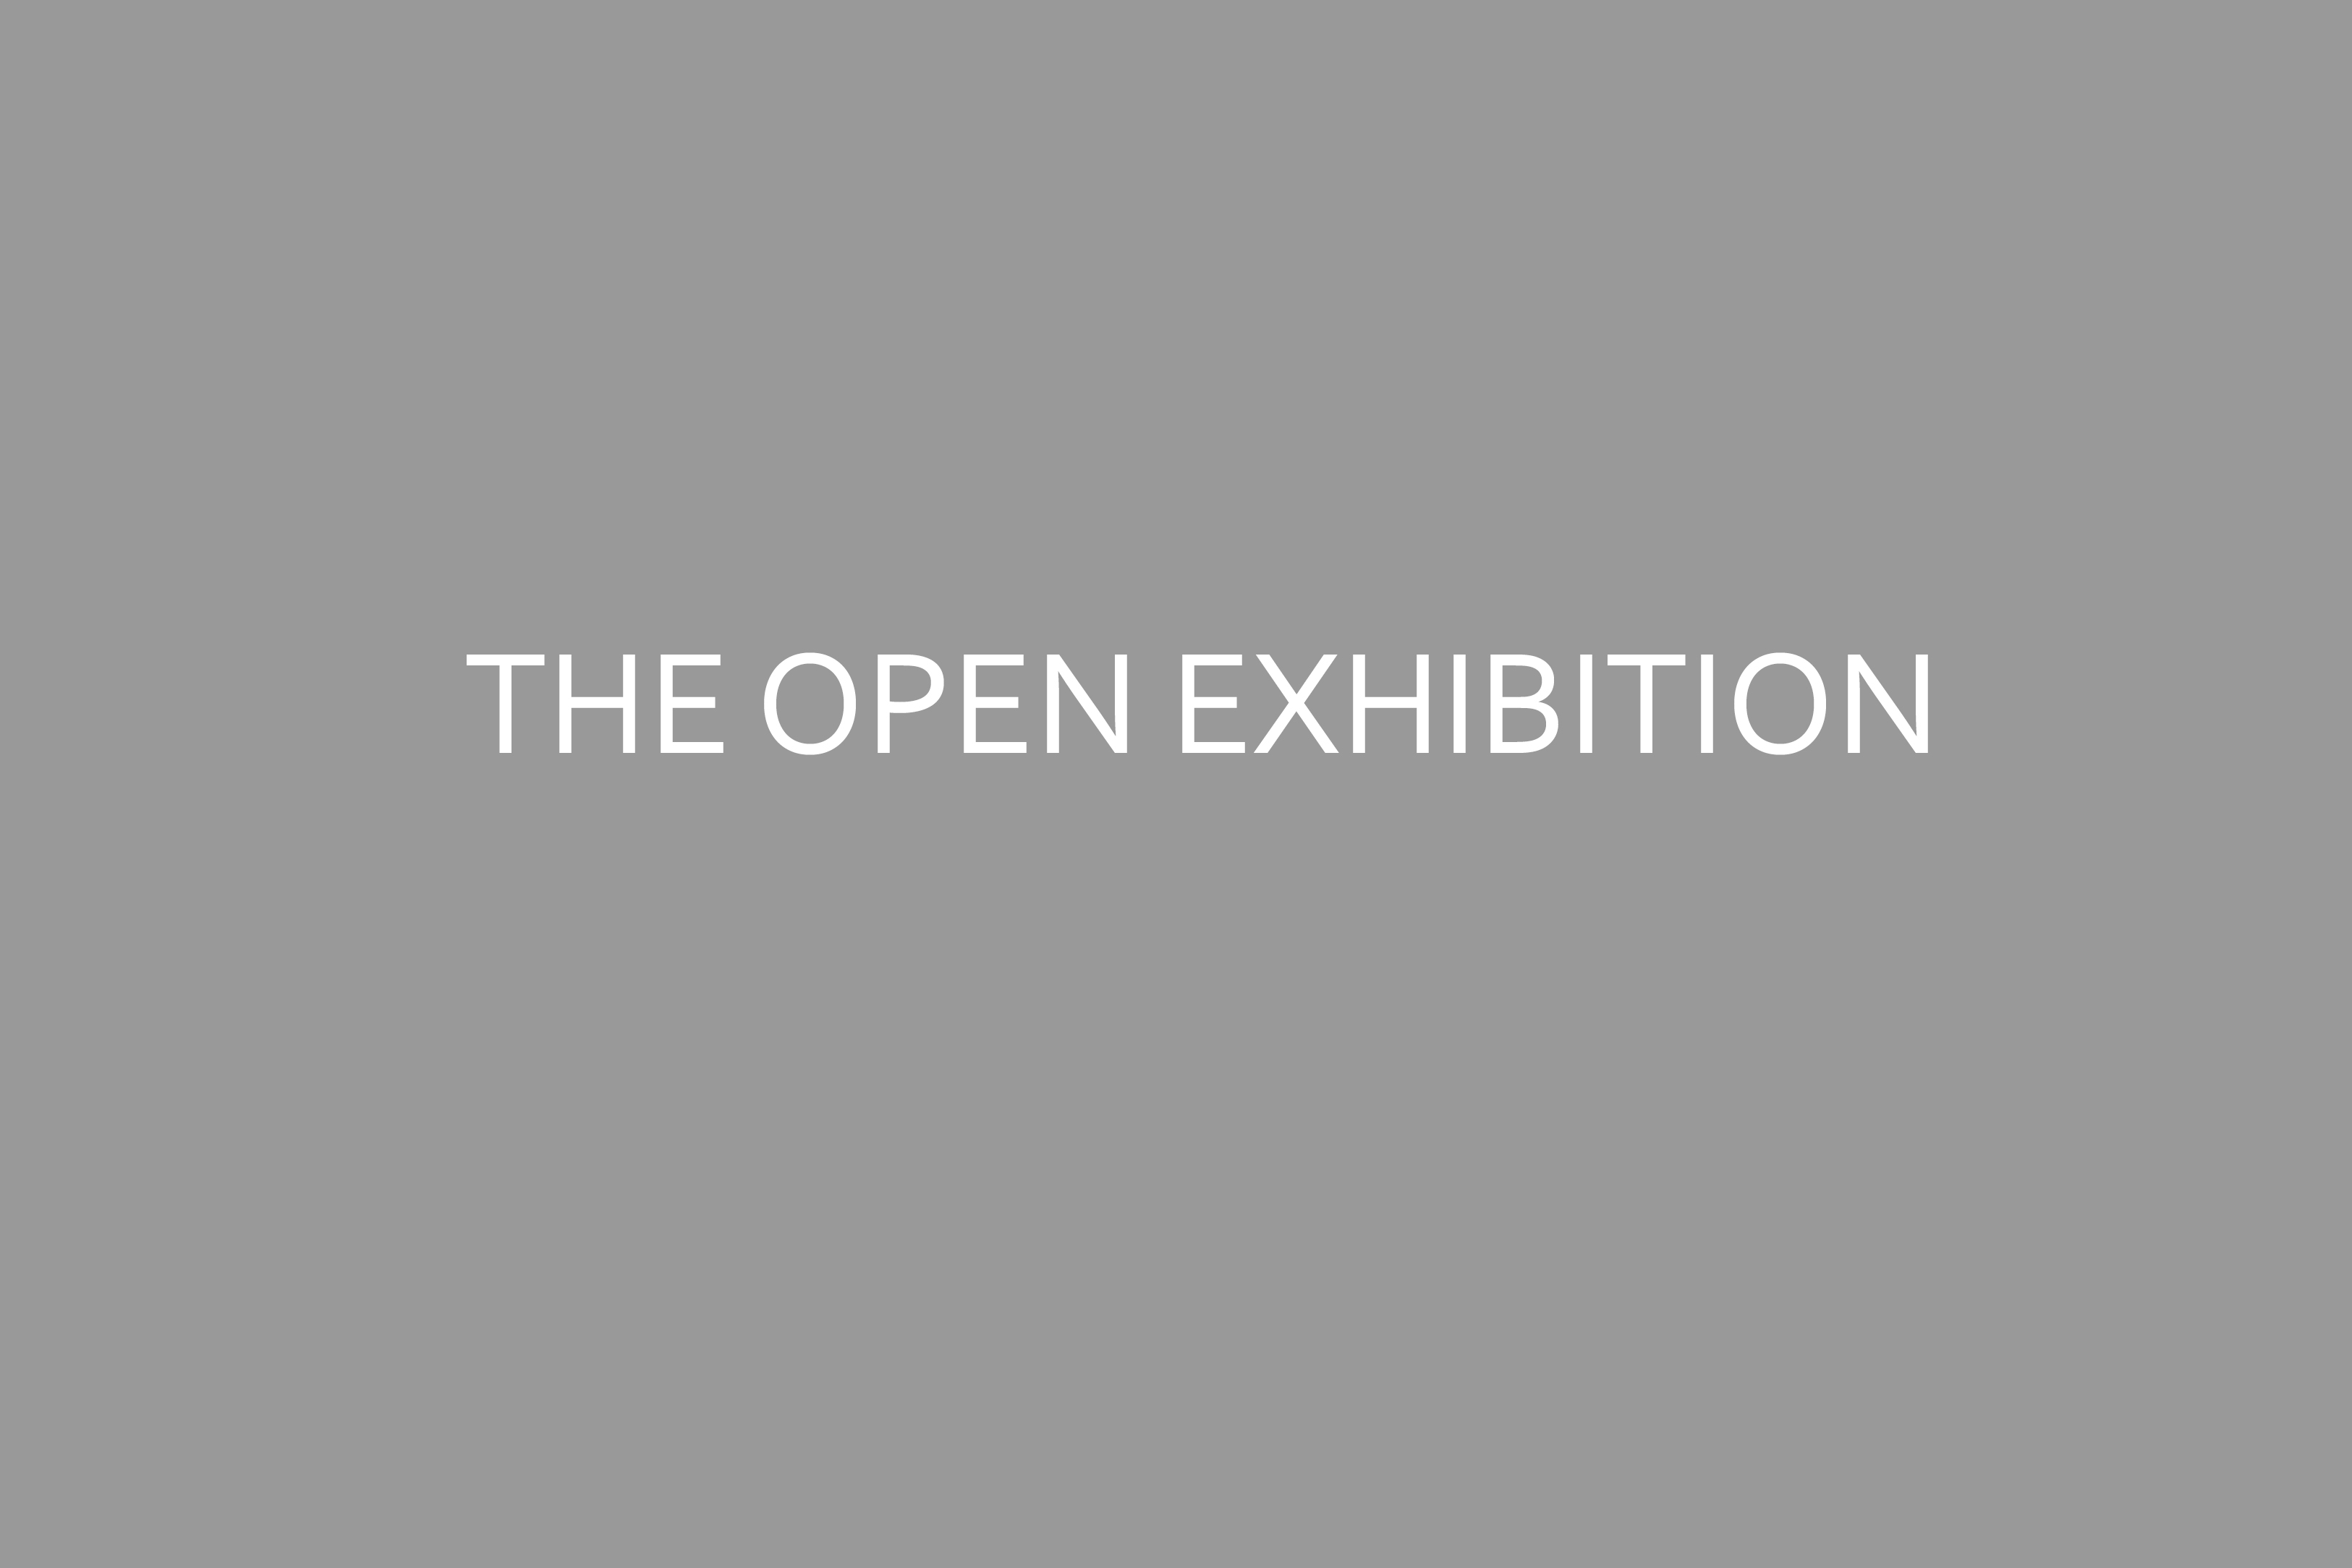 THE OPEN EXHIBITION